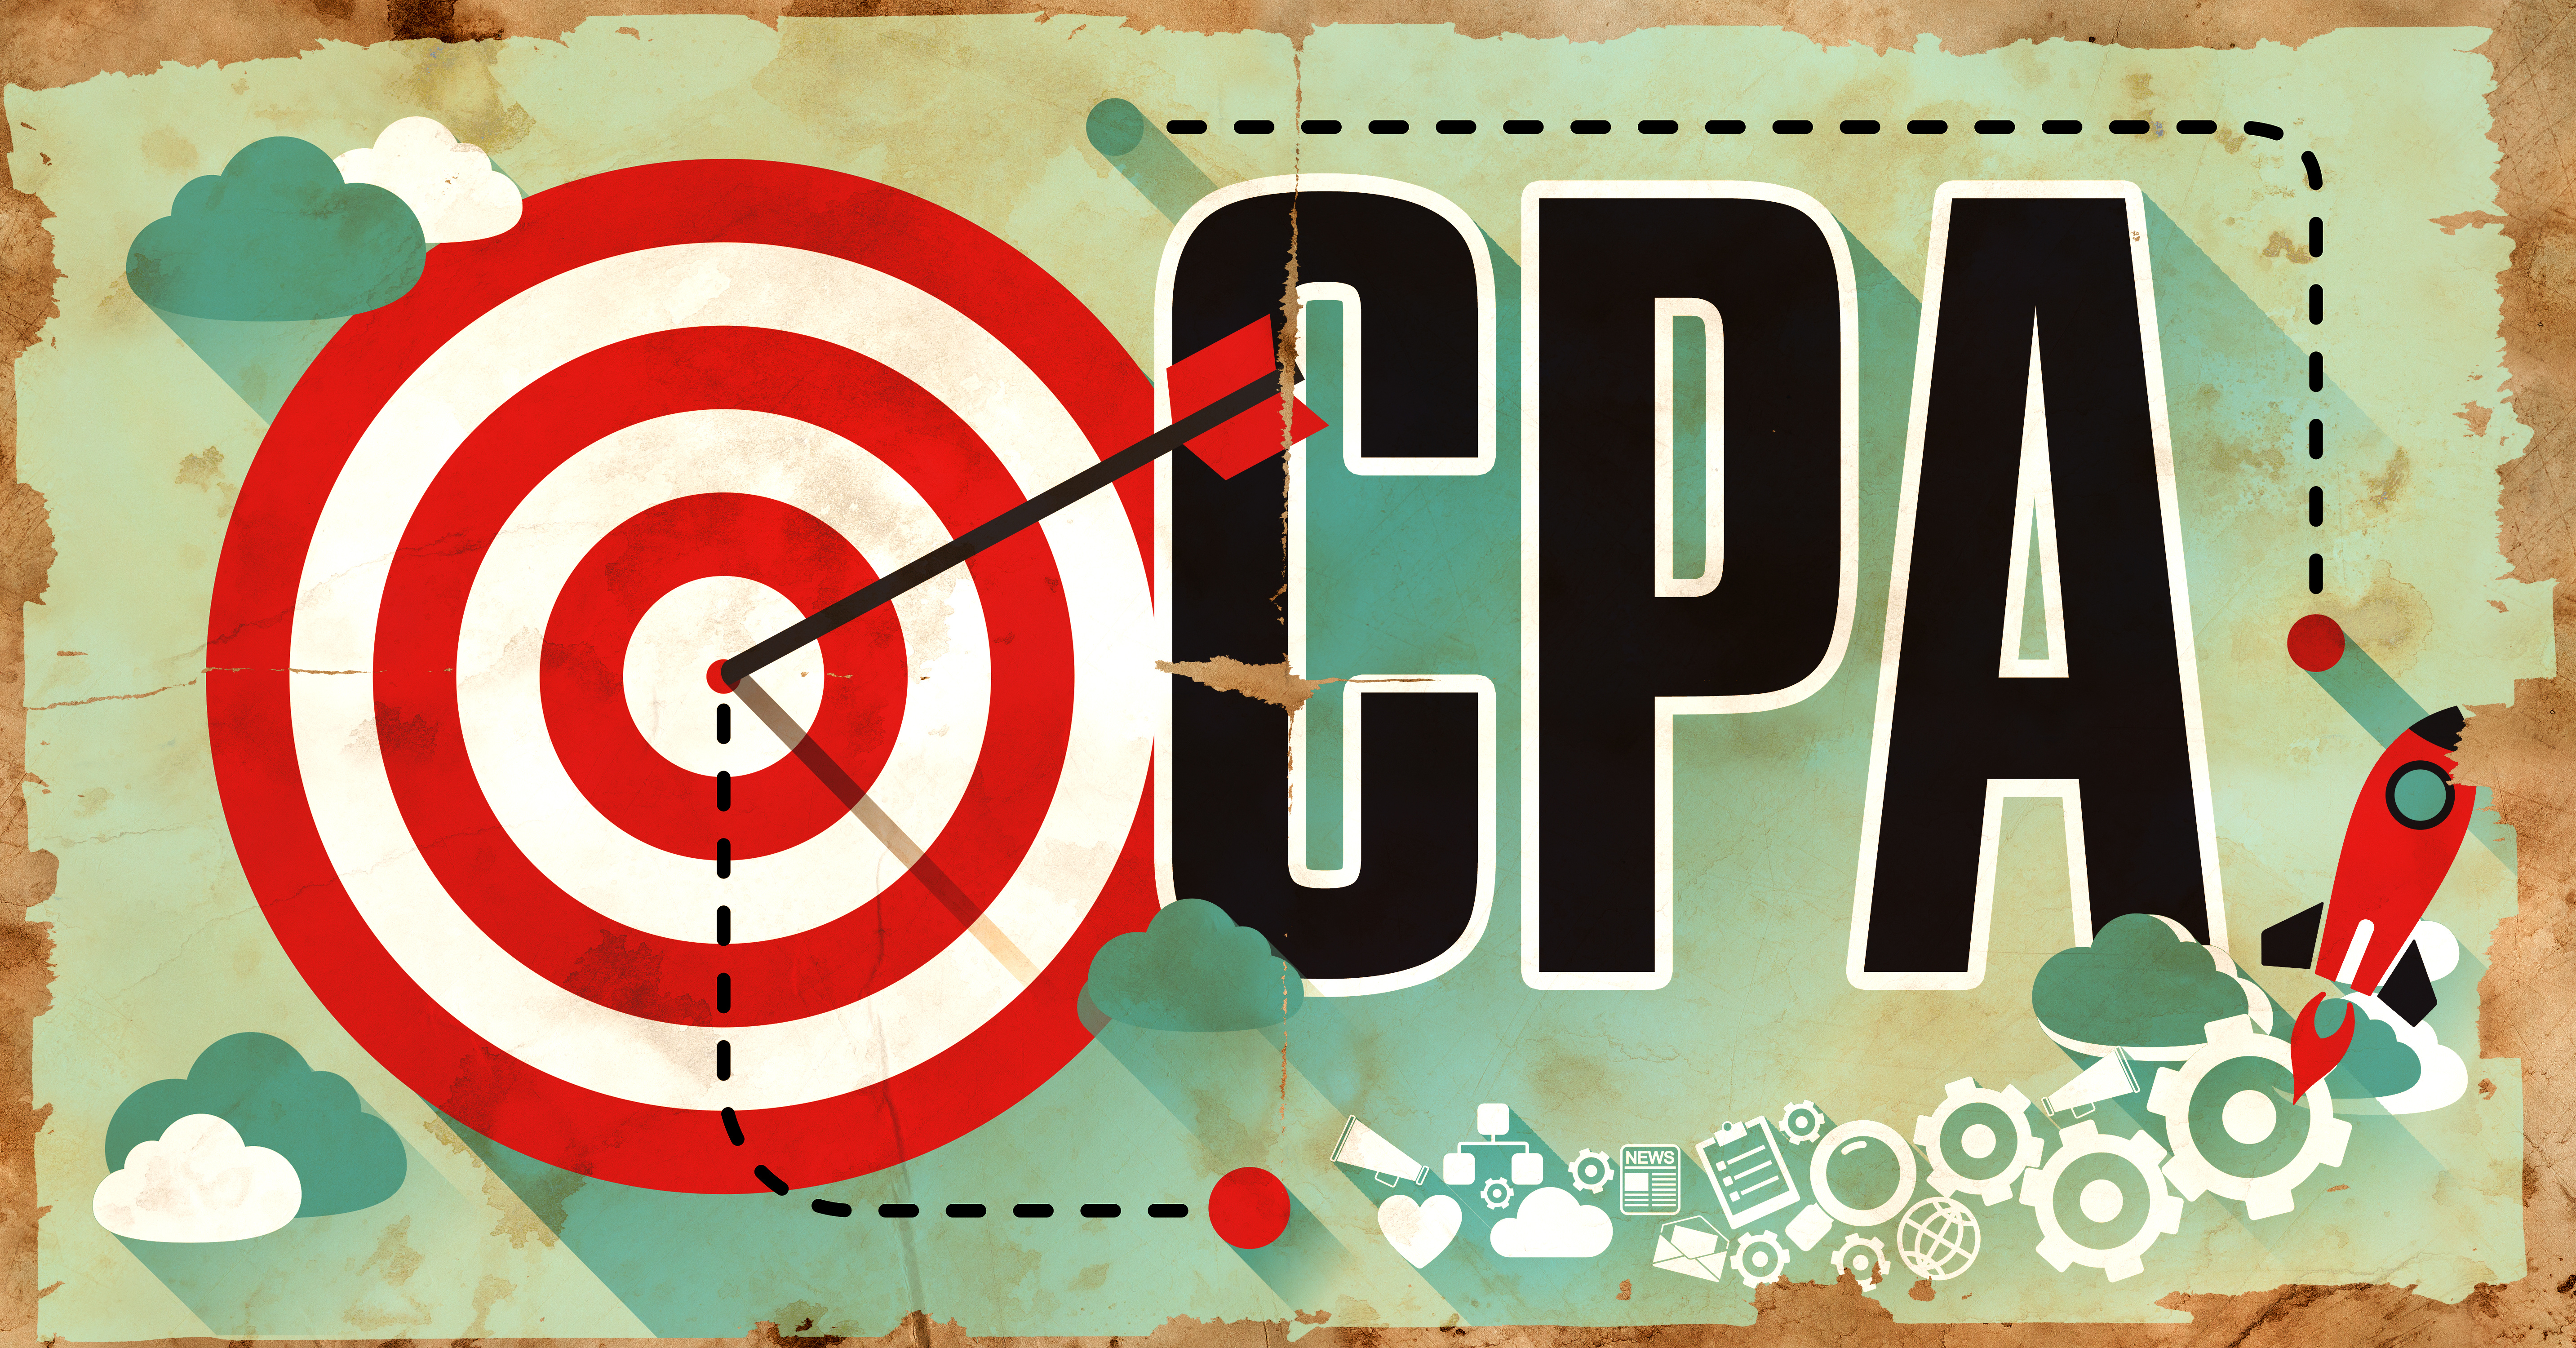 That may be how the vast majority of CPAs perform all the time, but some CPAs miss the target completely. Image courtesy of DollarPhotoClub.com